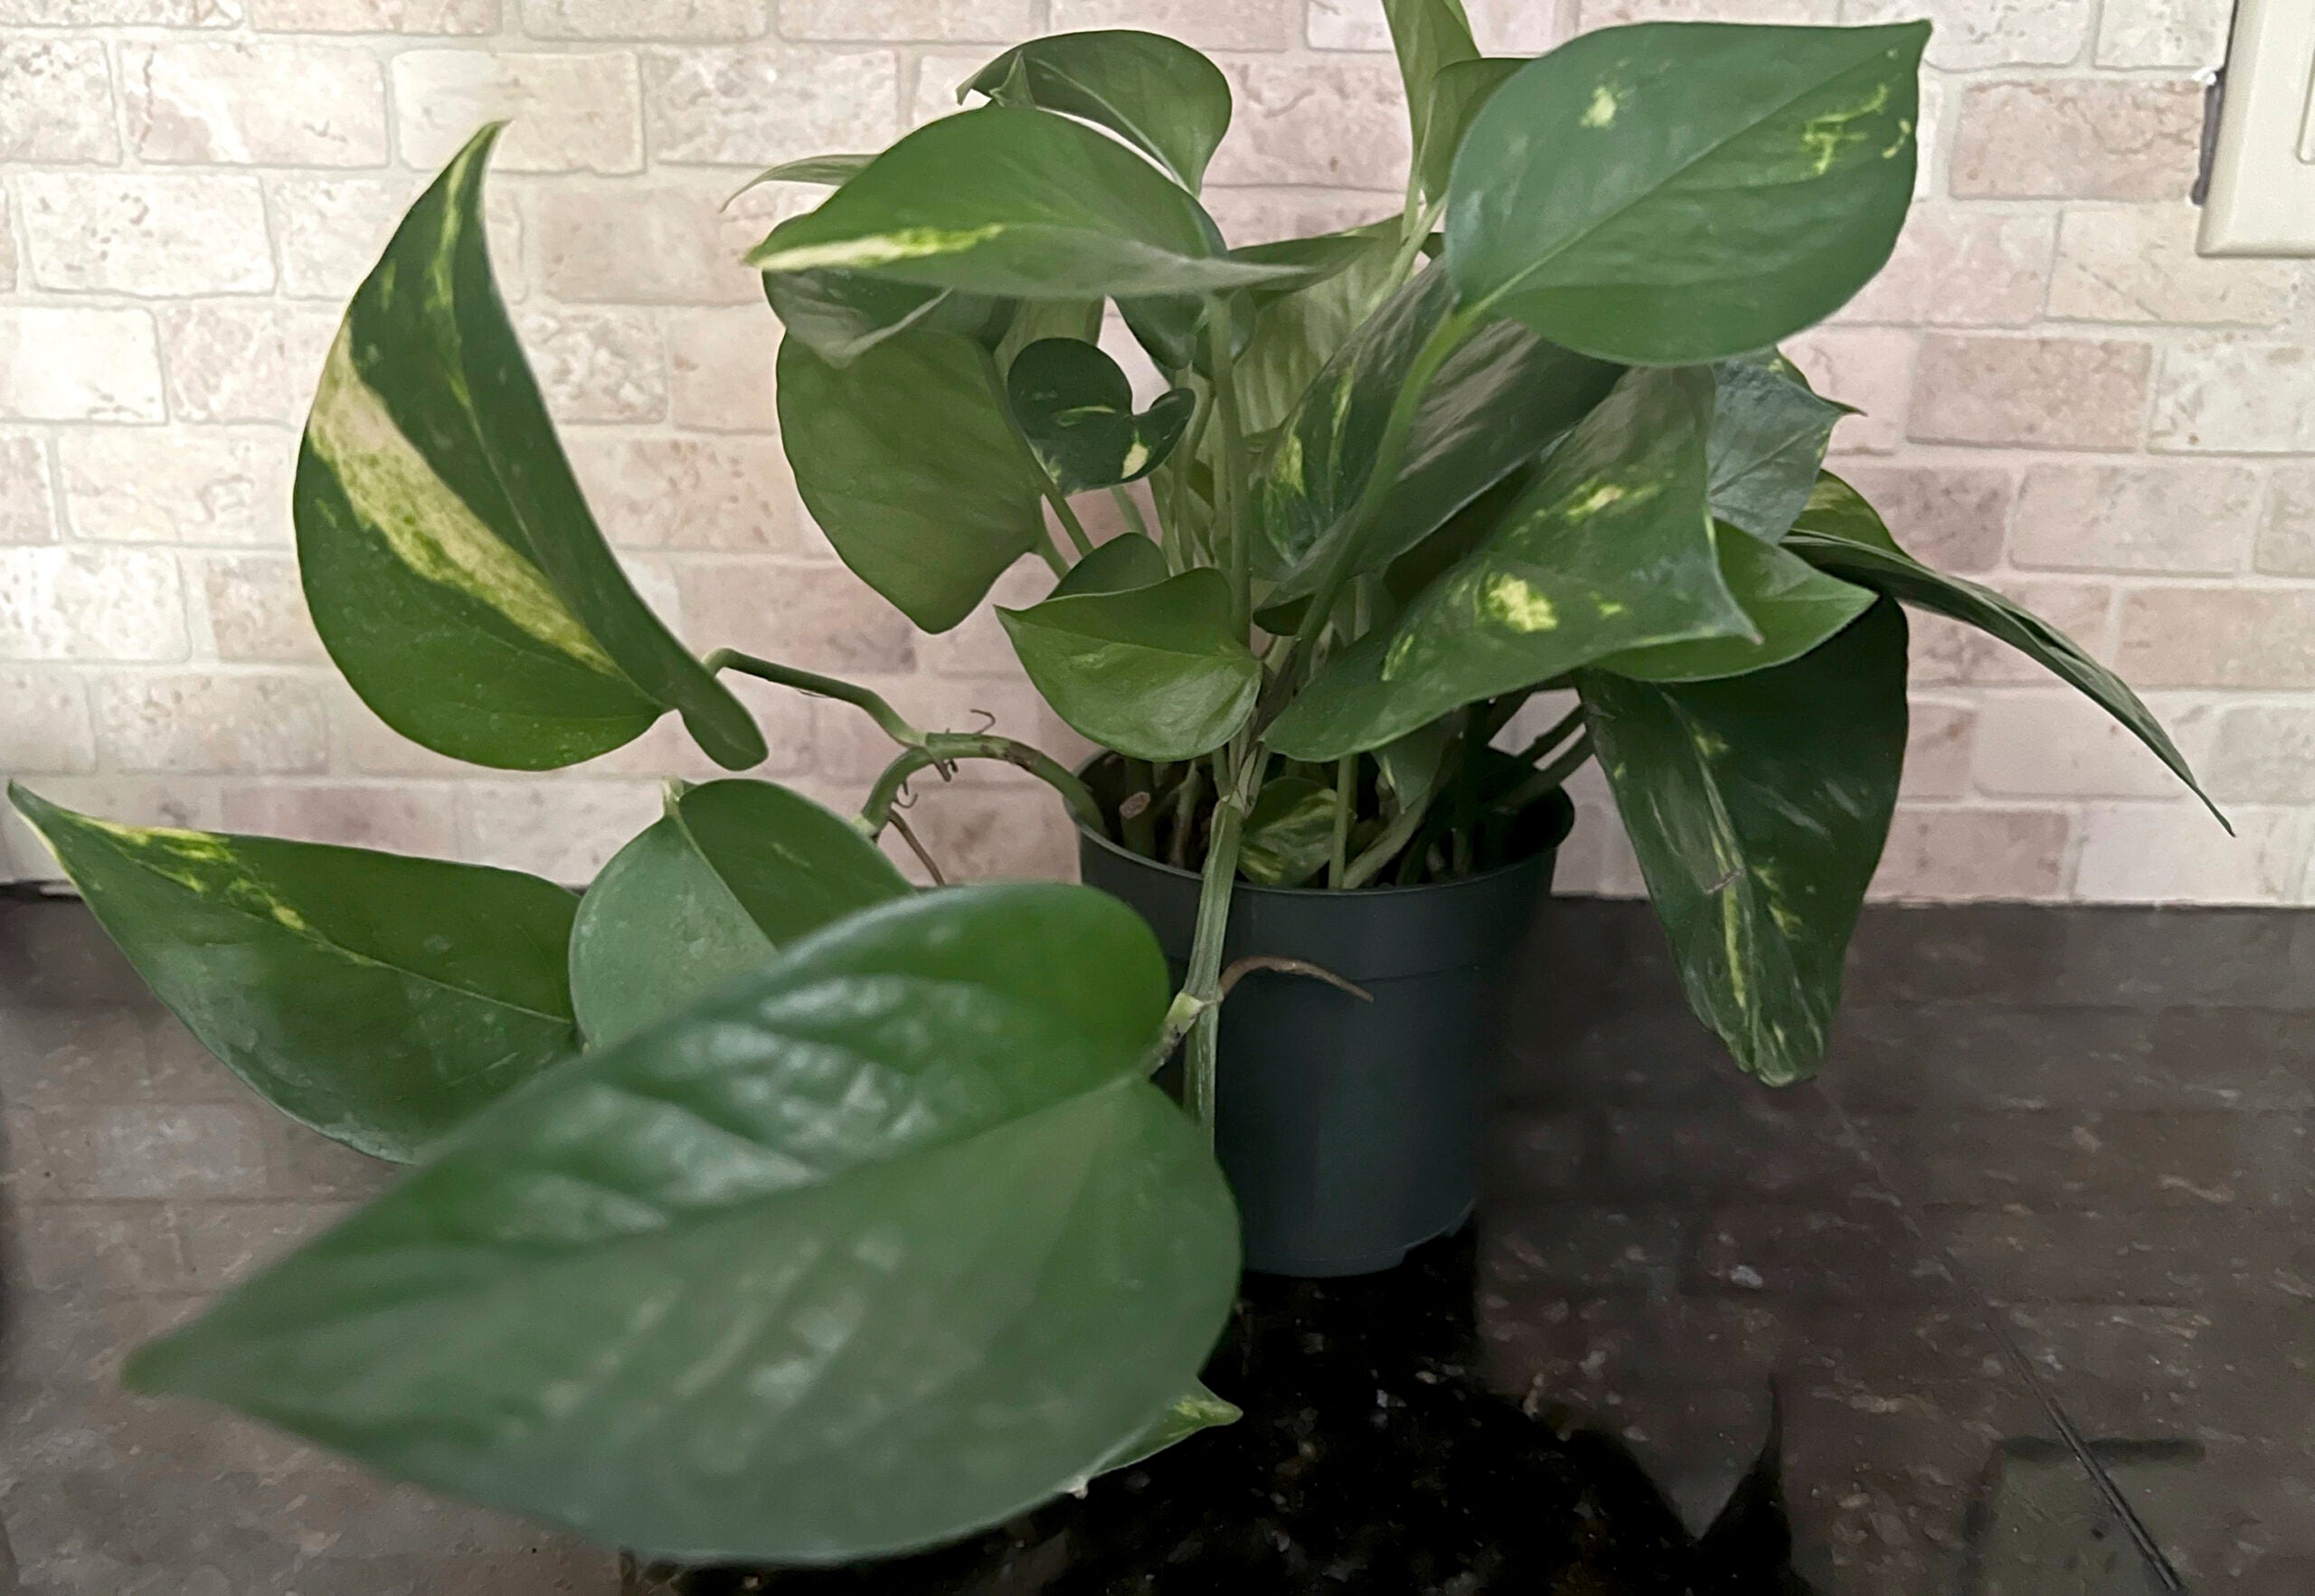 This Jan. 17, 2023, image provided by Jessica Damiano shows a vining pothos houseplant, which has toxic properties so should be kept away from children. (Jessica Damiano via AP)